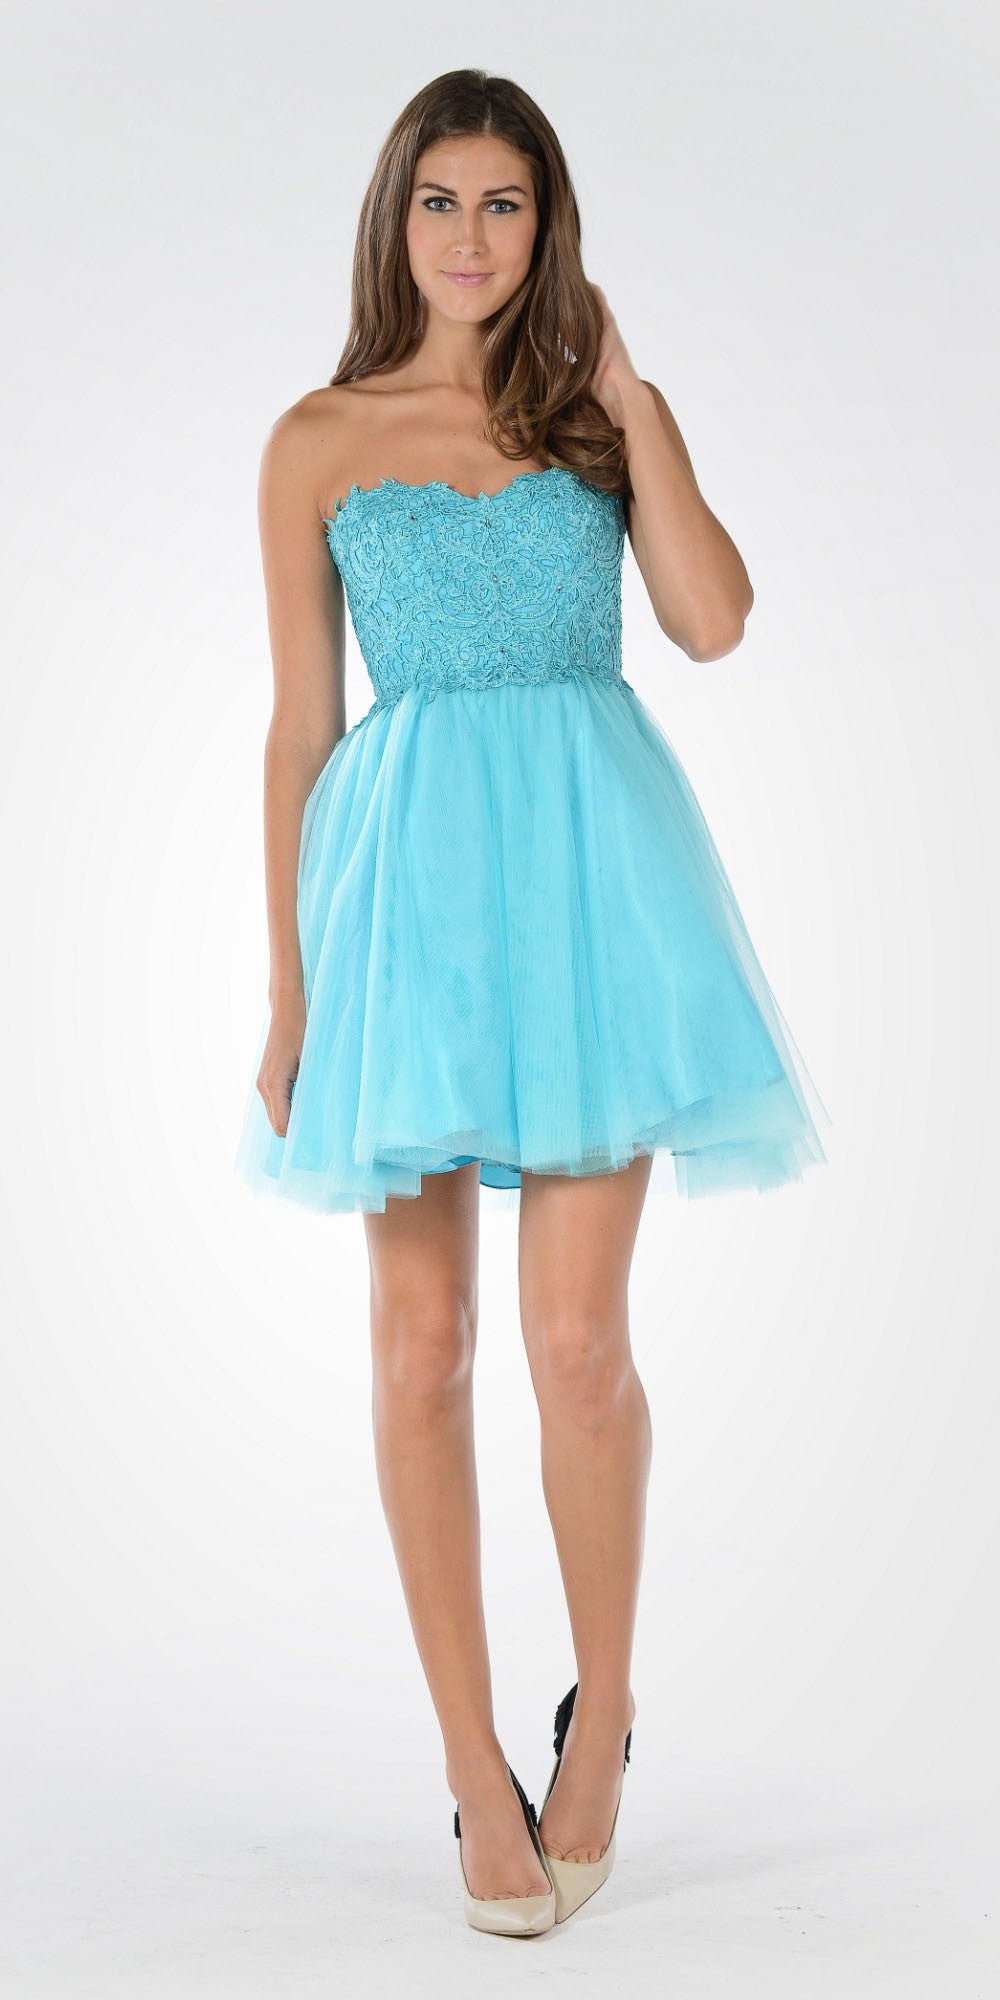 Poly USA 7718 - Lace Bodice Tulle Skirt A-line Homecoming Dress Strapless Aqua